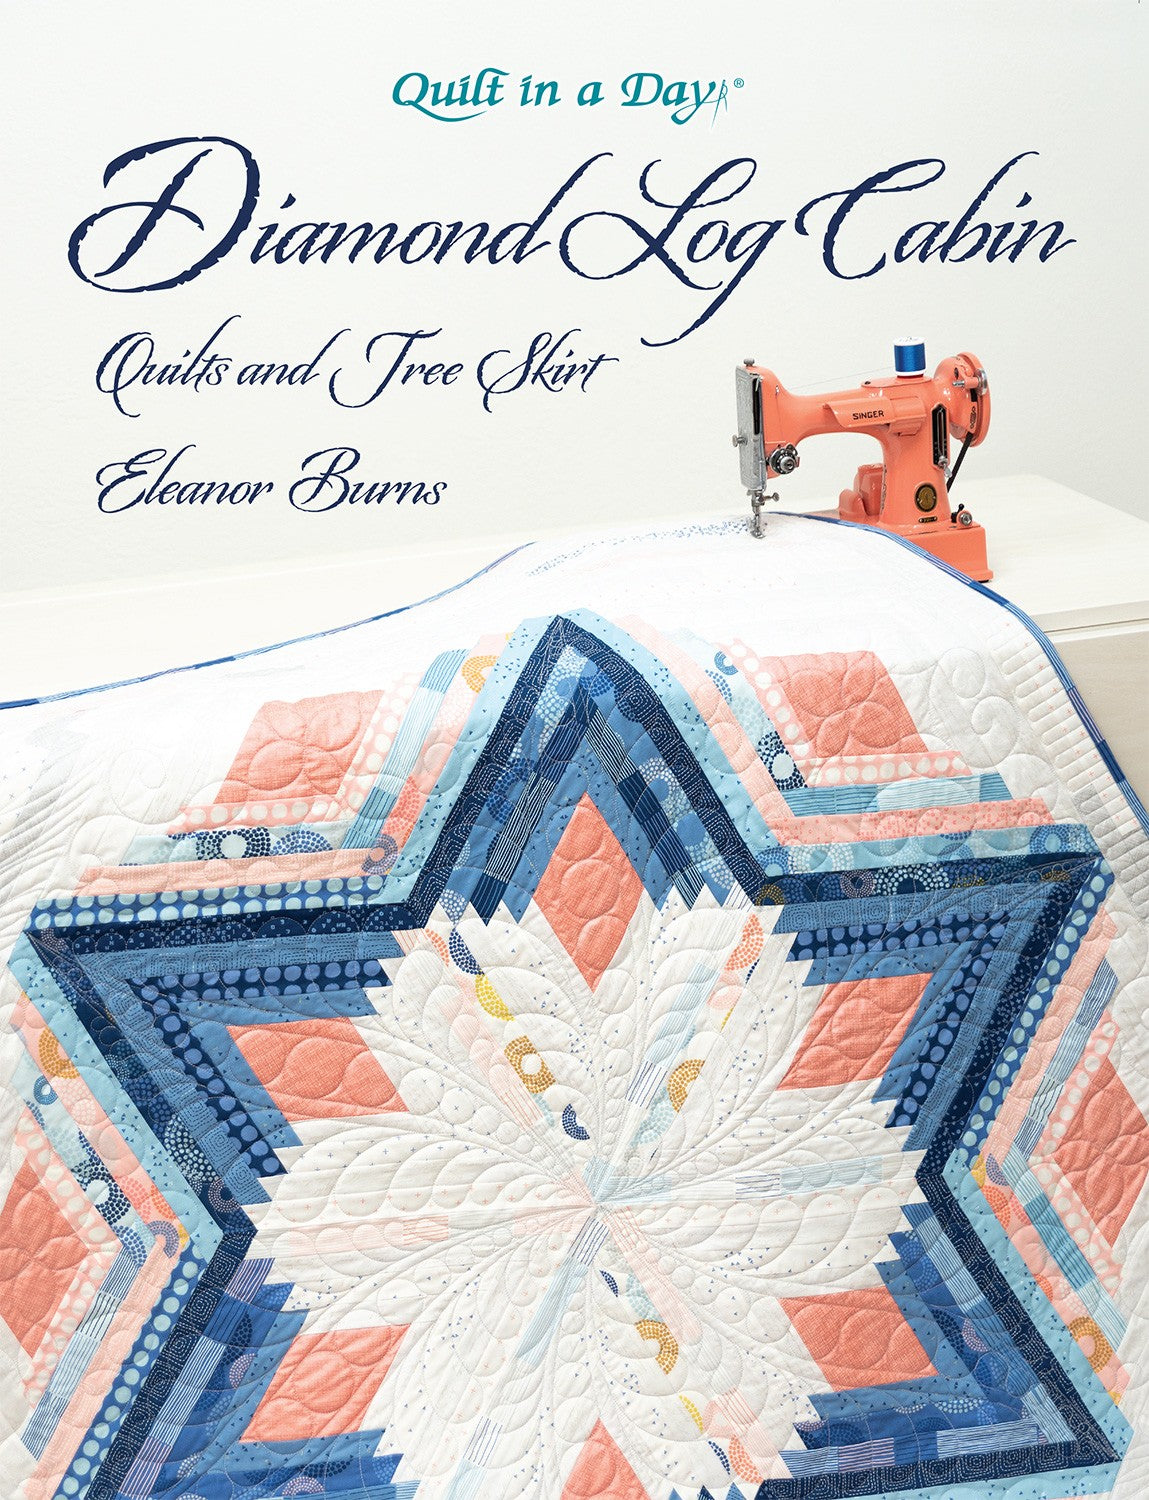 Diamond Log Cabin Quilts and Tree Skirt Pattern Book by Eleanor Burns for Quilt In A Day